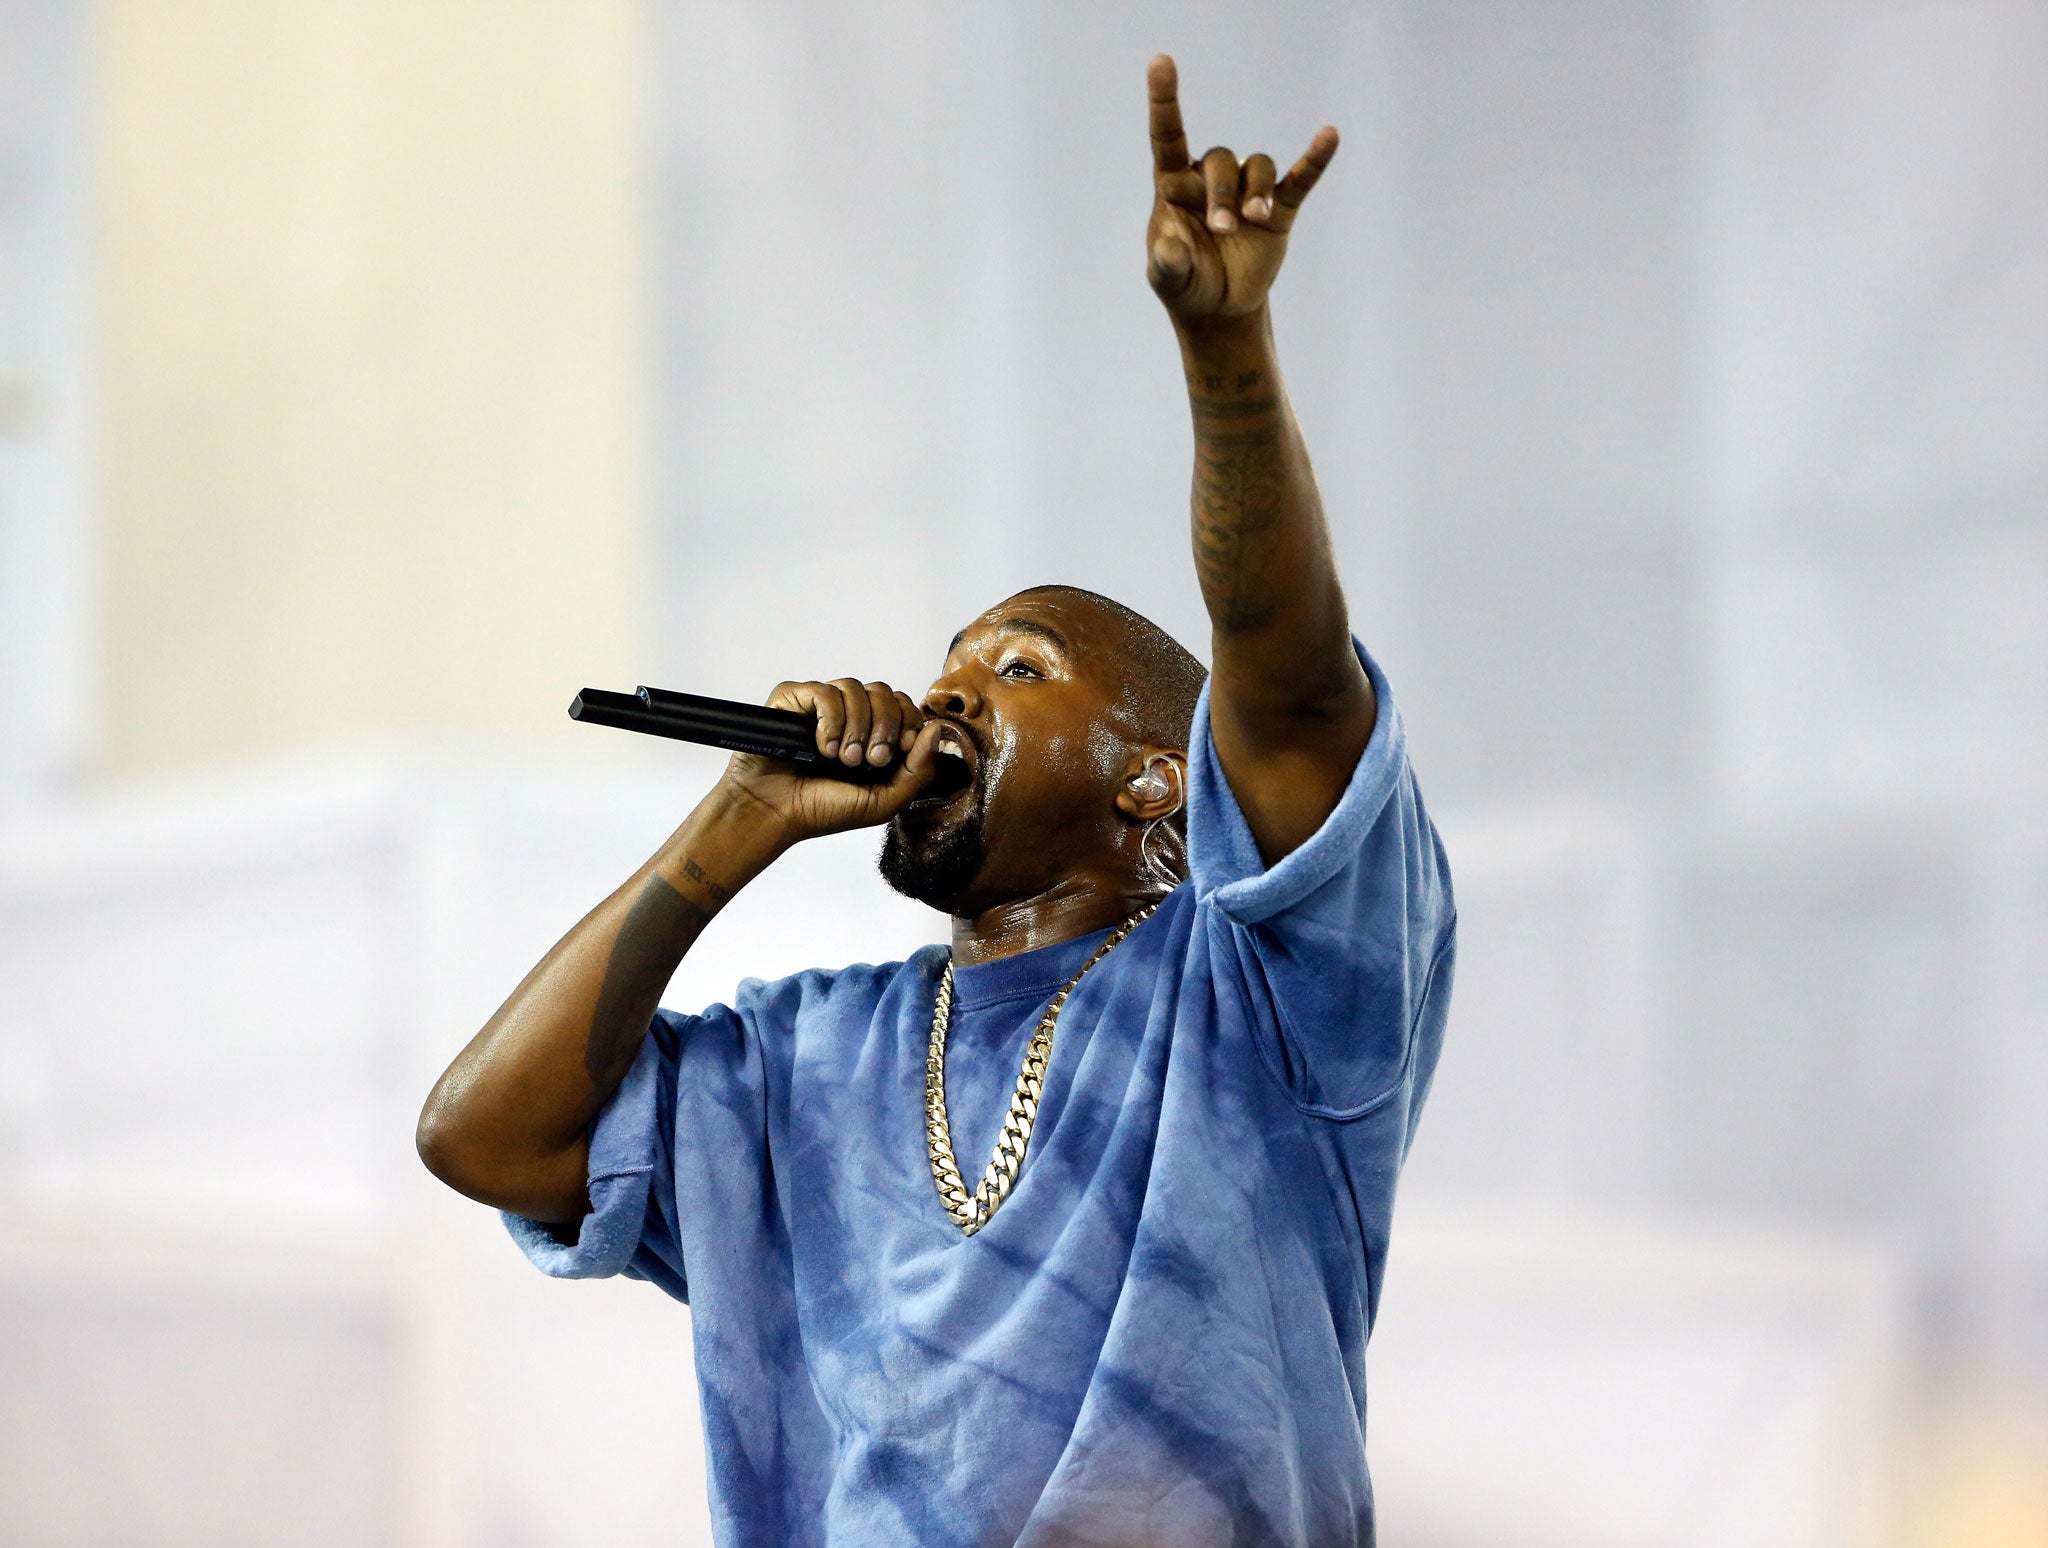 Kanye West preforms during the closing ceremony on Day 16 of the Toronto 2015 Pan Am Games on July 26